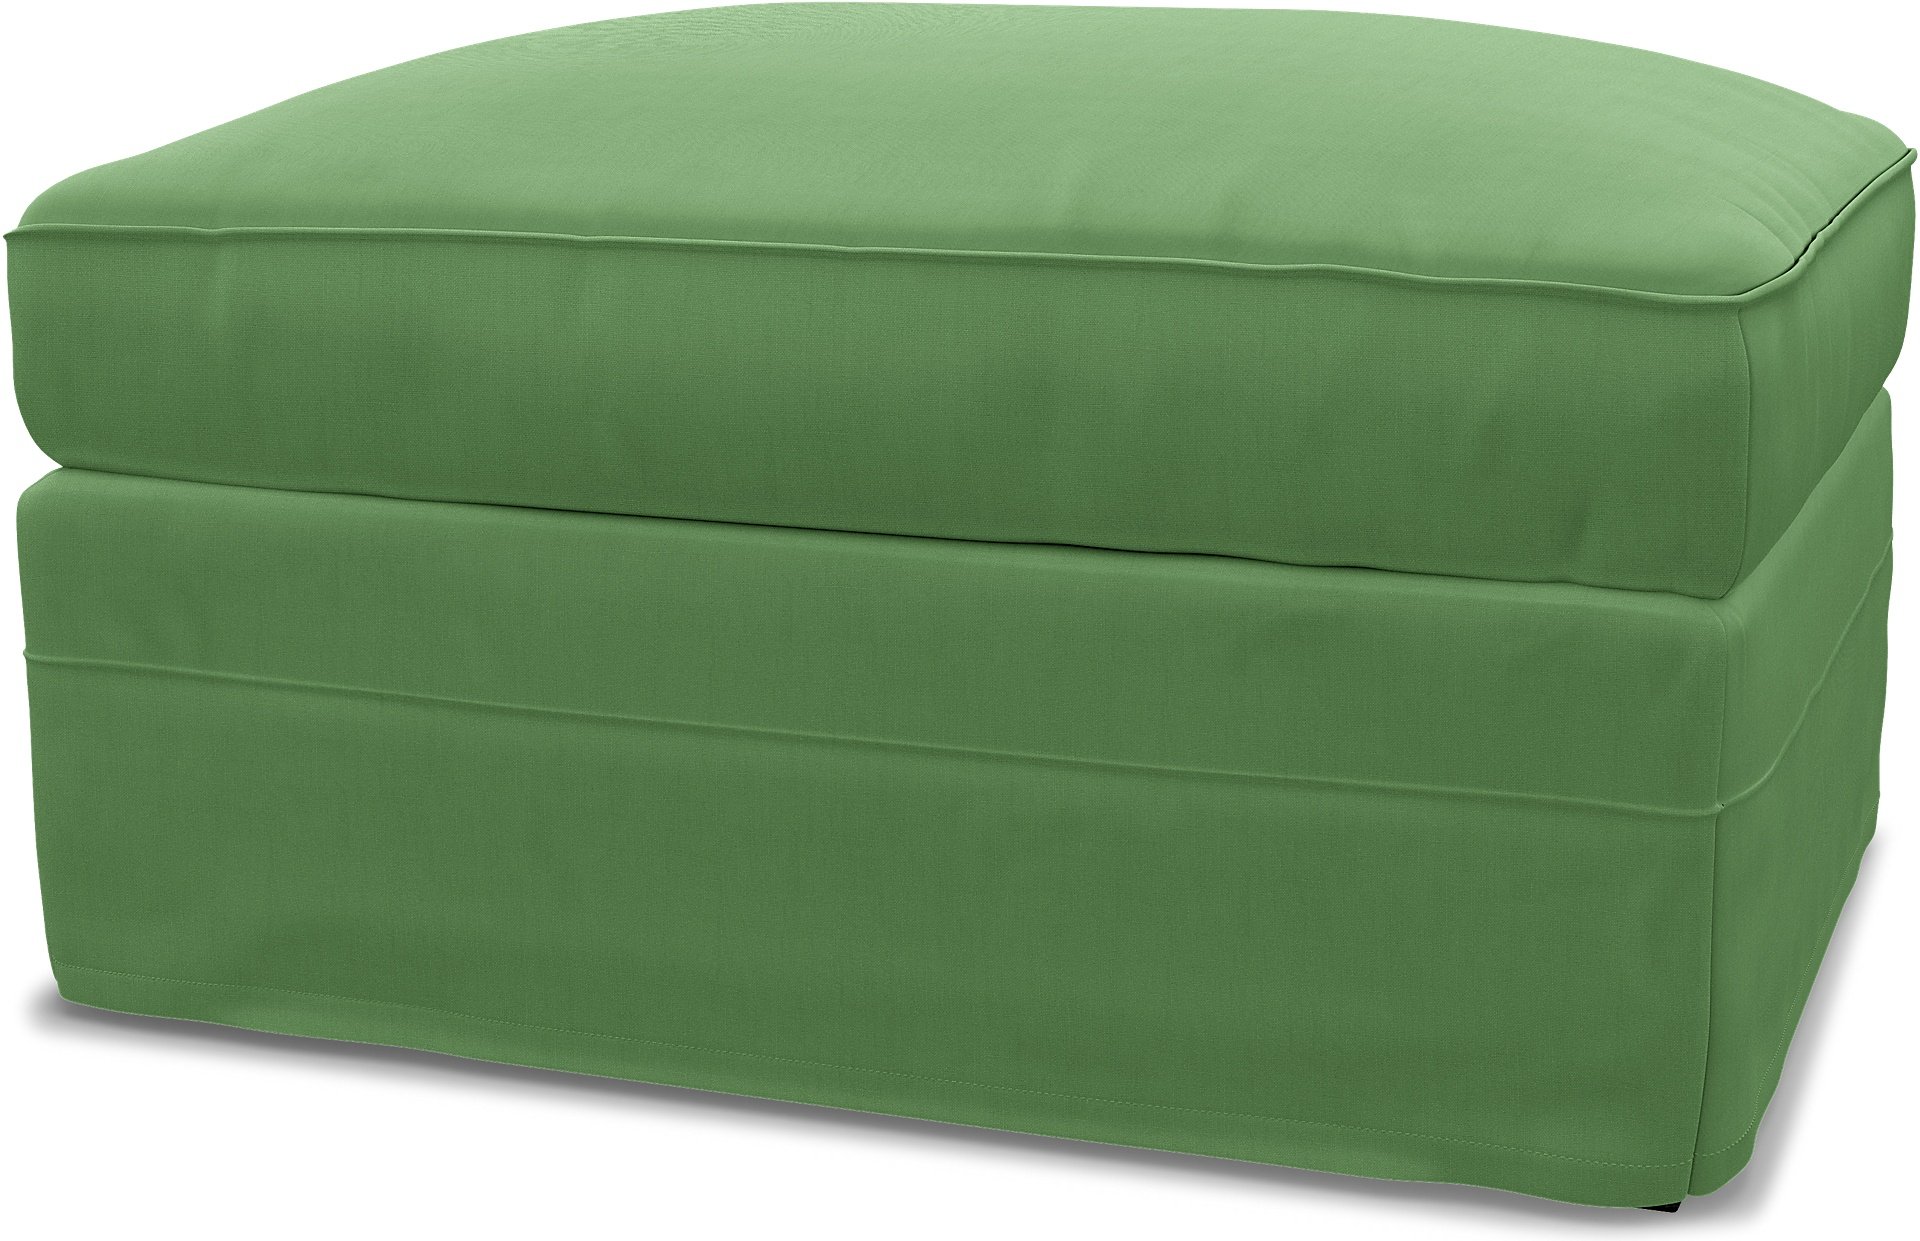 IKEA - Gronlid Footstool with Storage Cover, Apple Green, Linen - Bemz